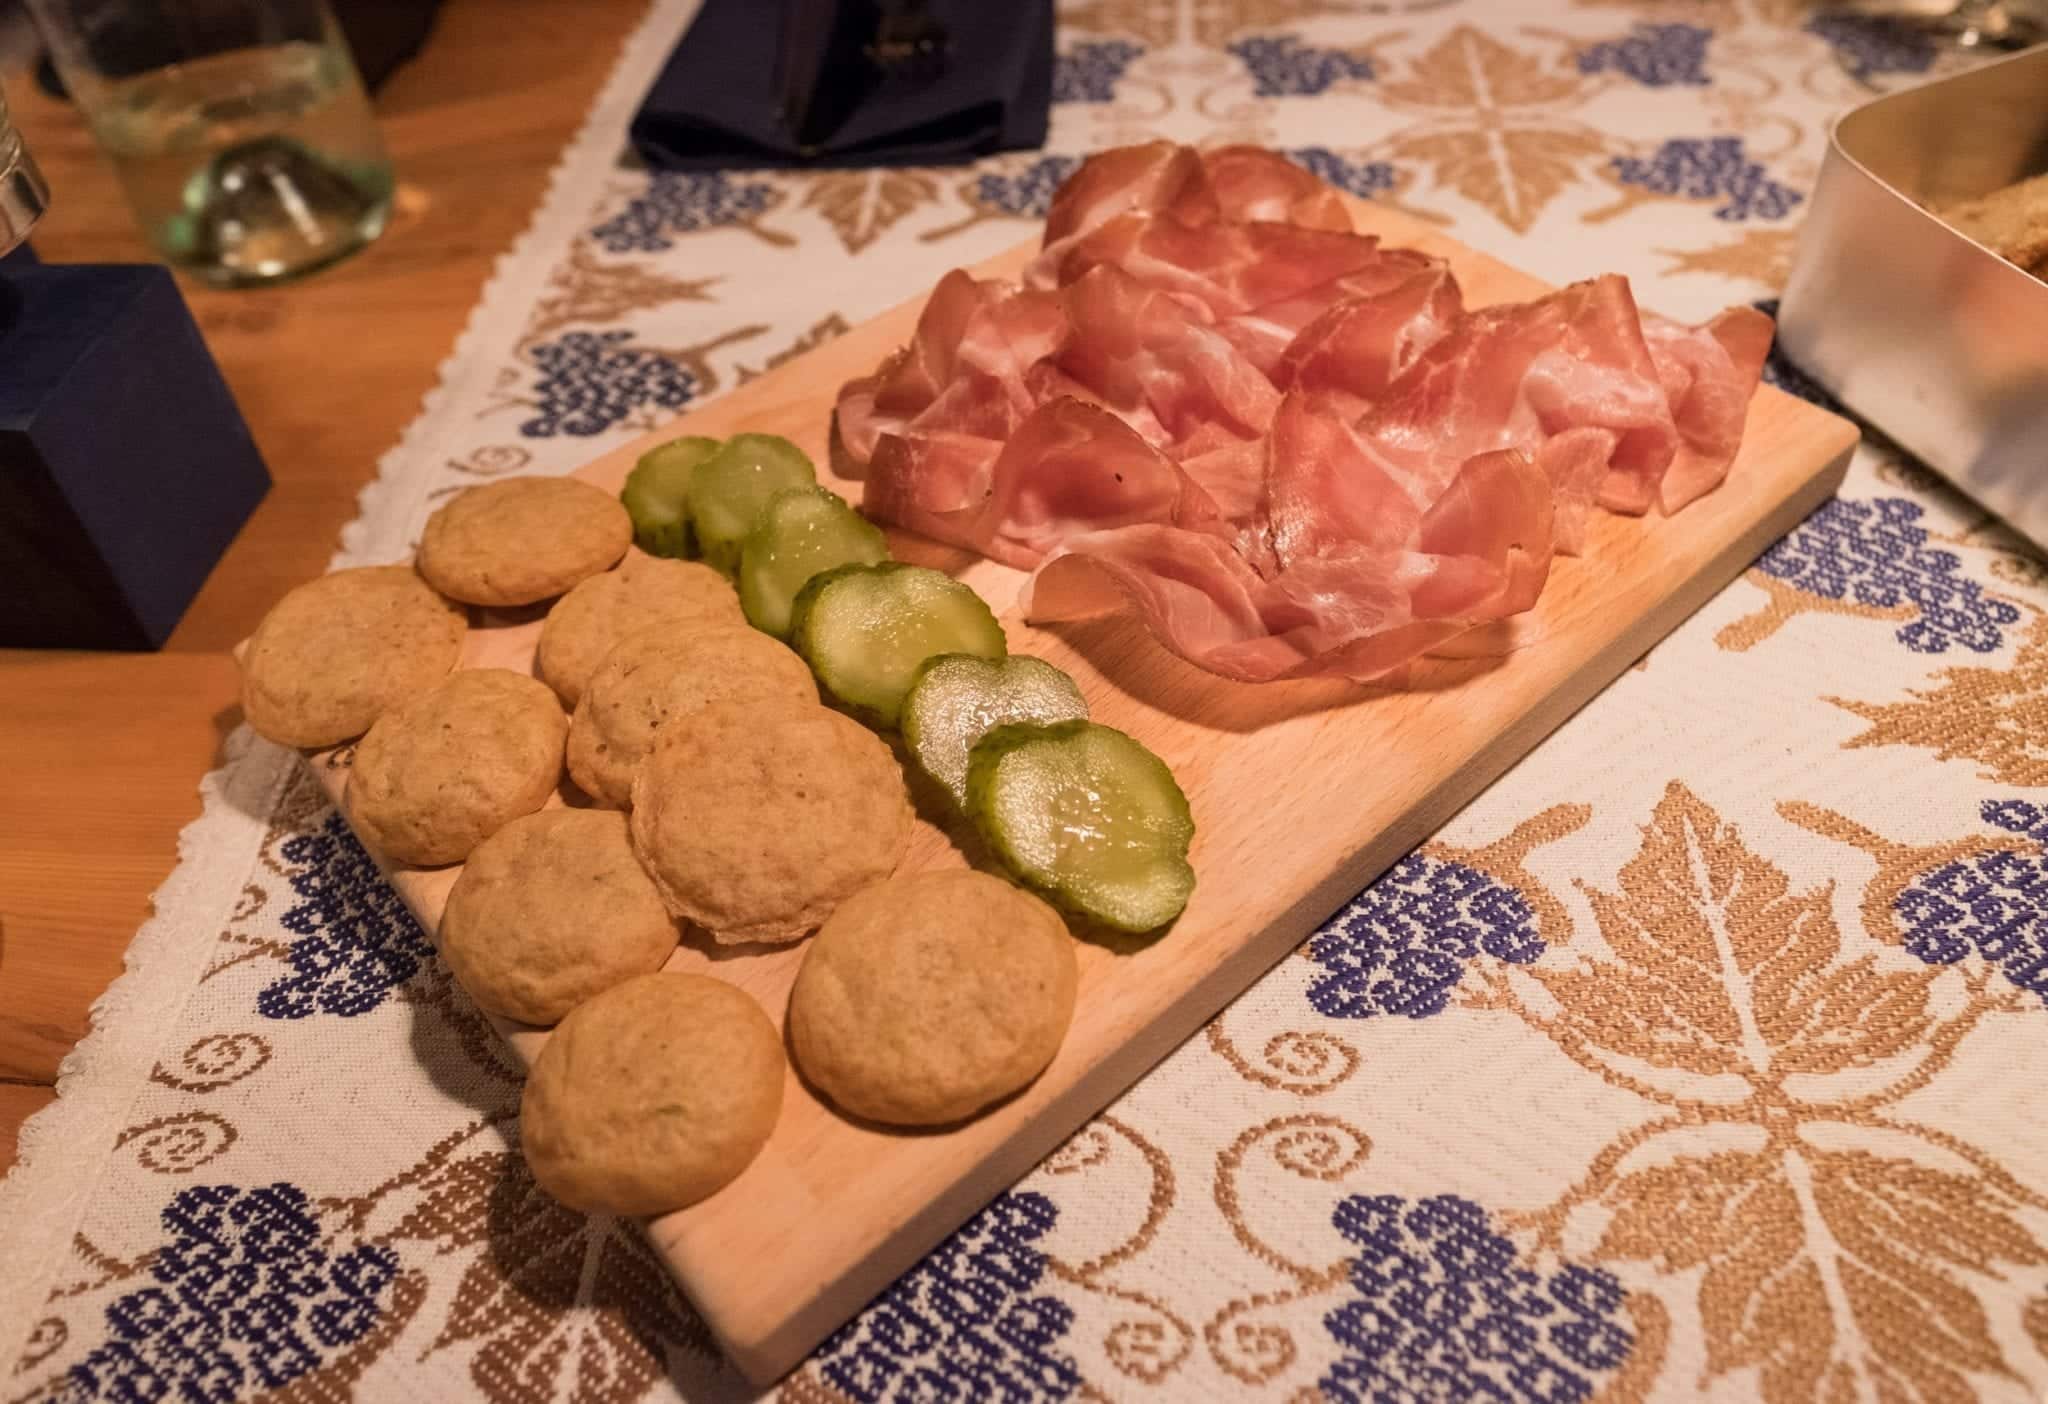 A platter covered with round pieces of fried bread, pickles, and pink feathery speck.